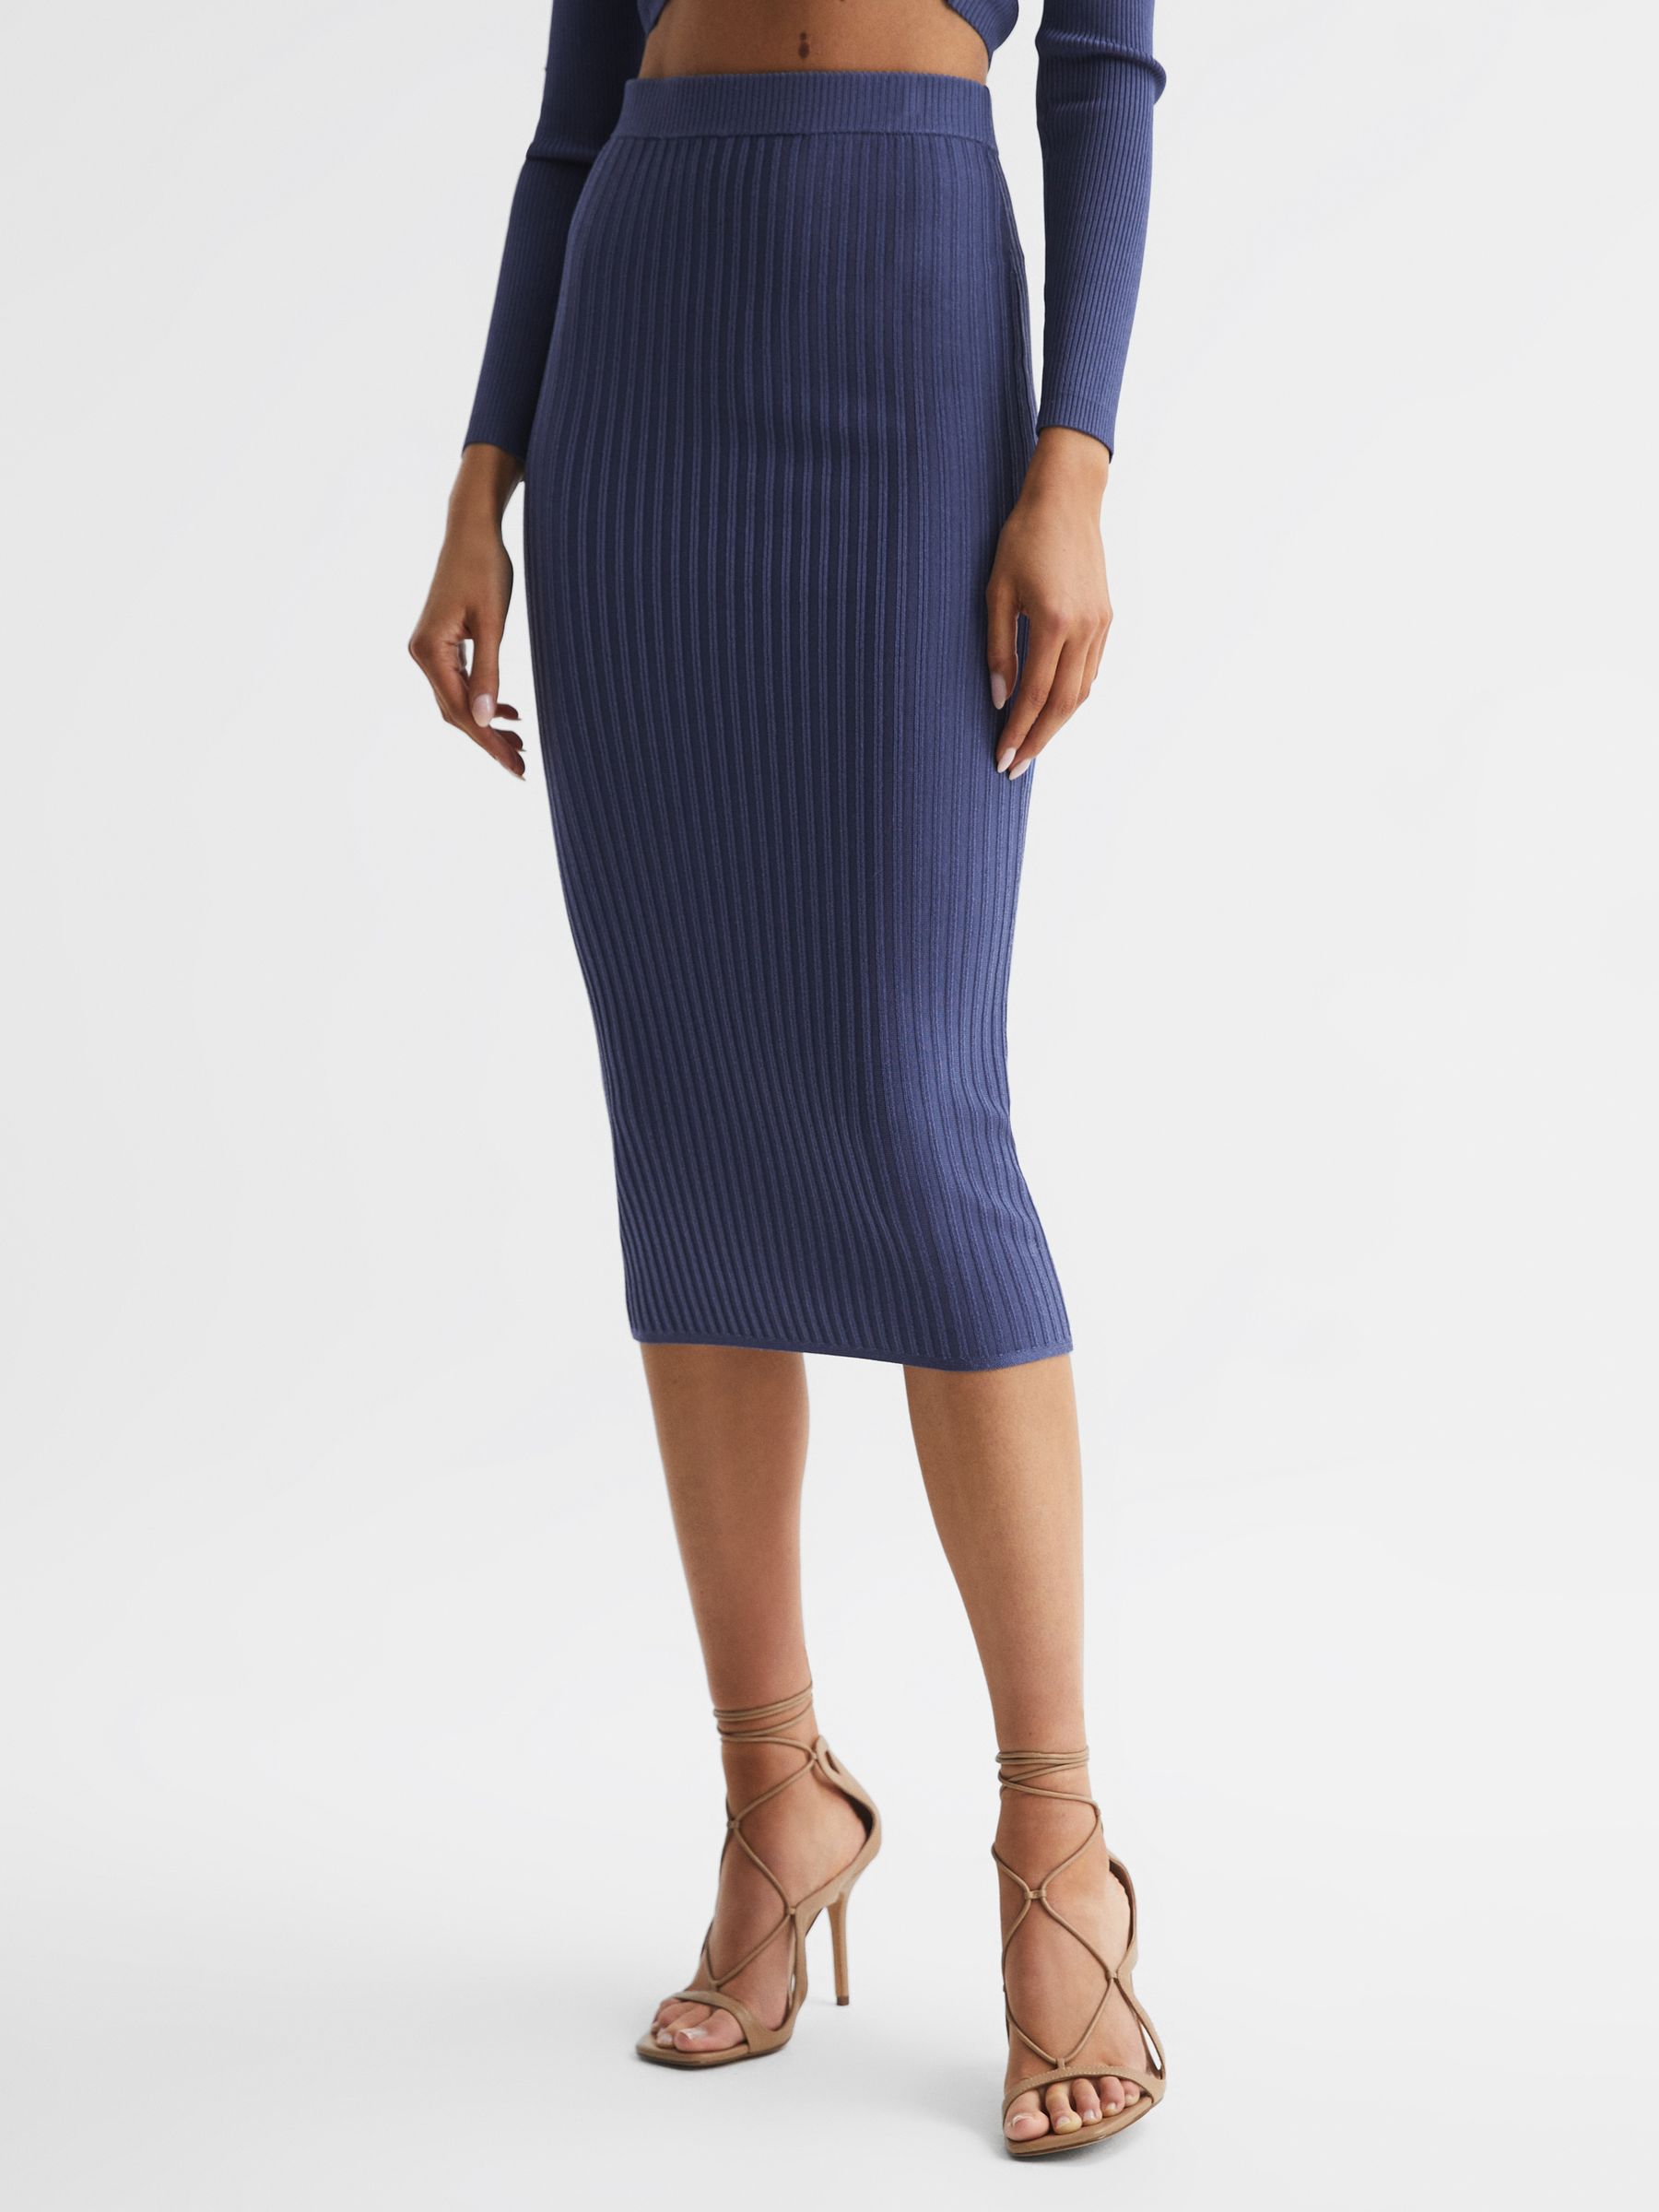 Reiss Iona Knitted Pencil Skirt Co-Ord - REISS